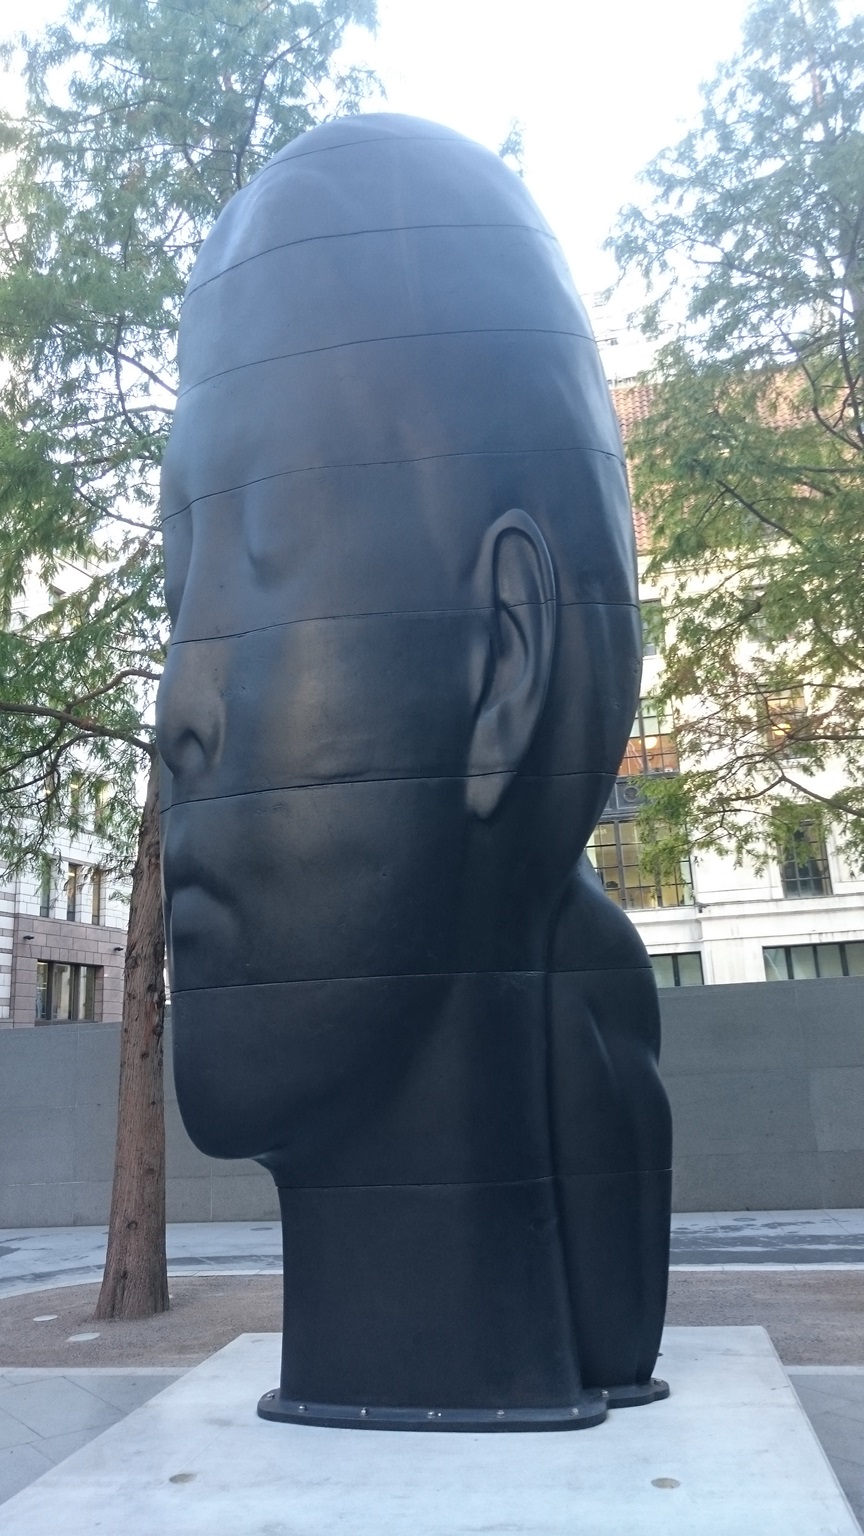 Sculpture in the City